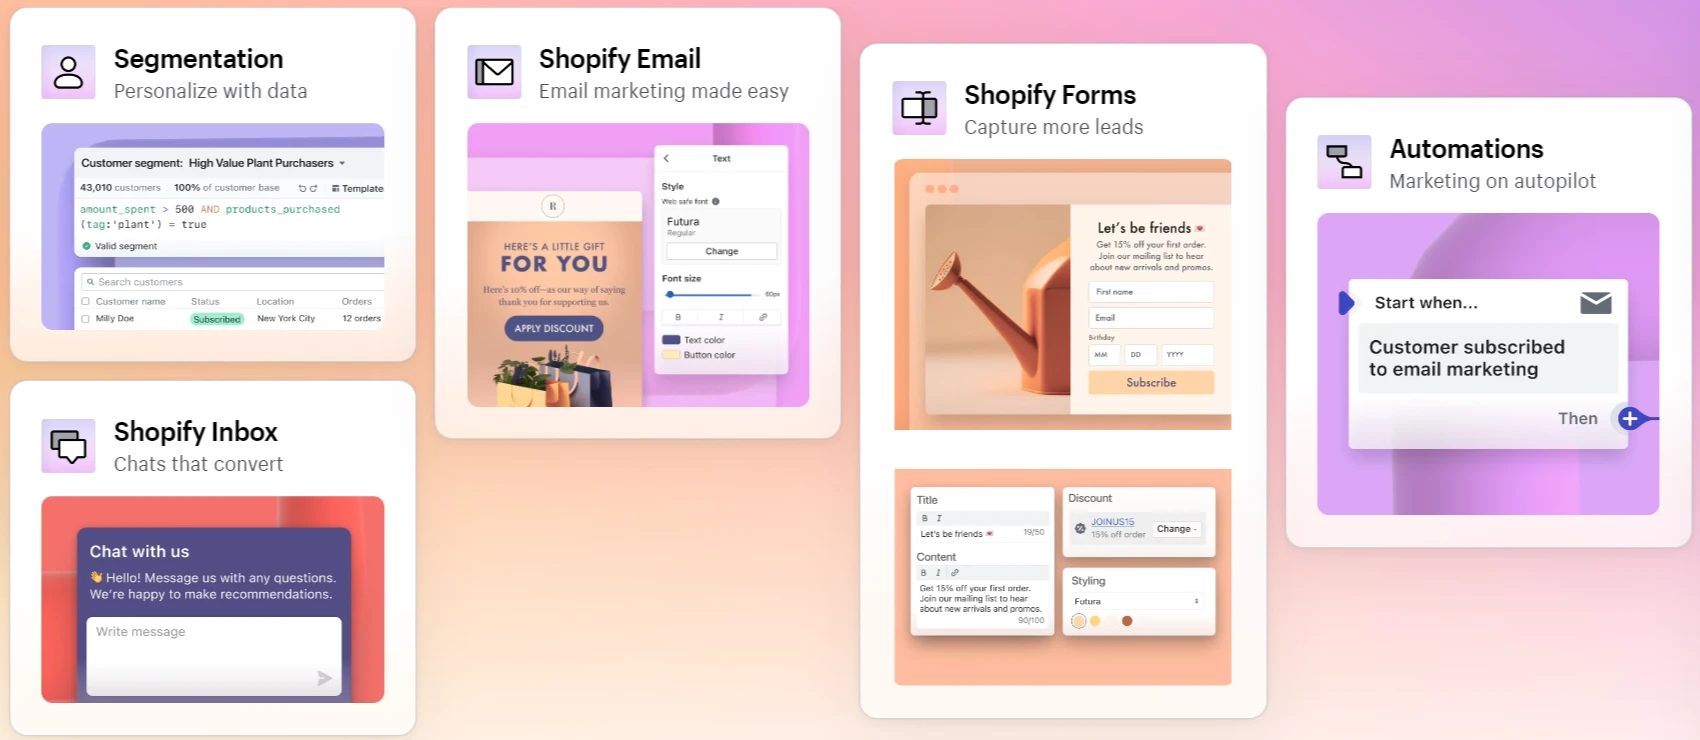 Shopify offers a range of marketing tools